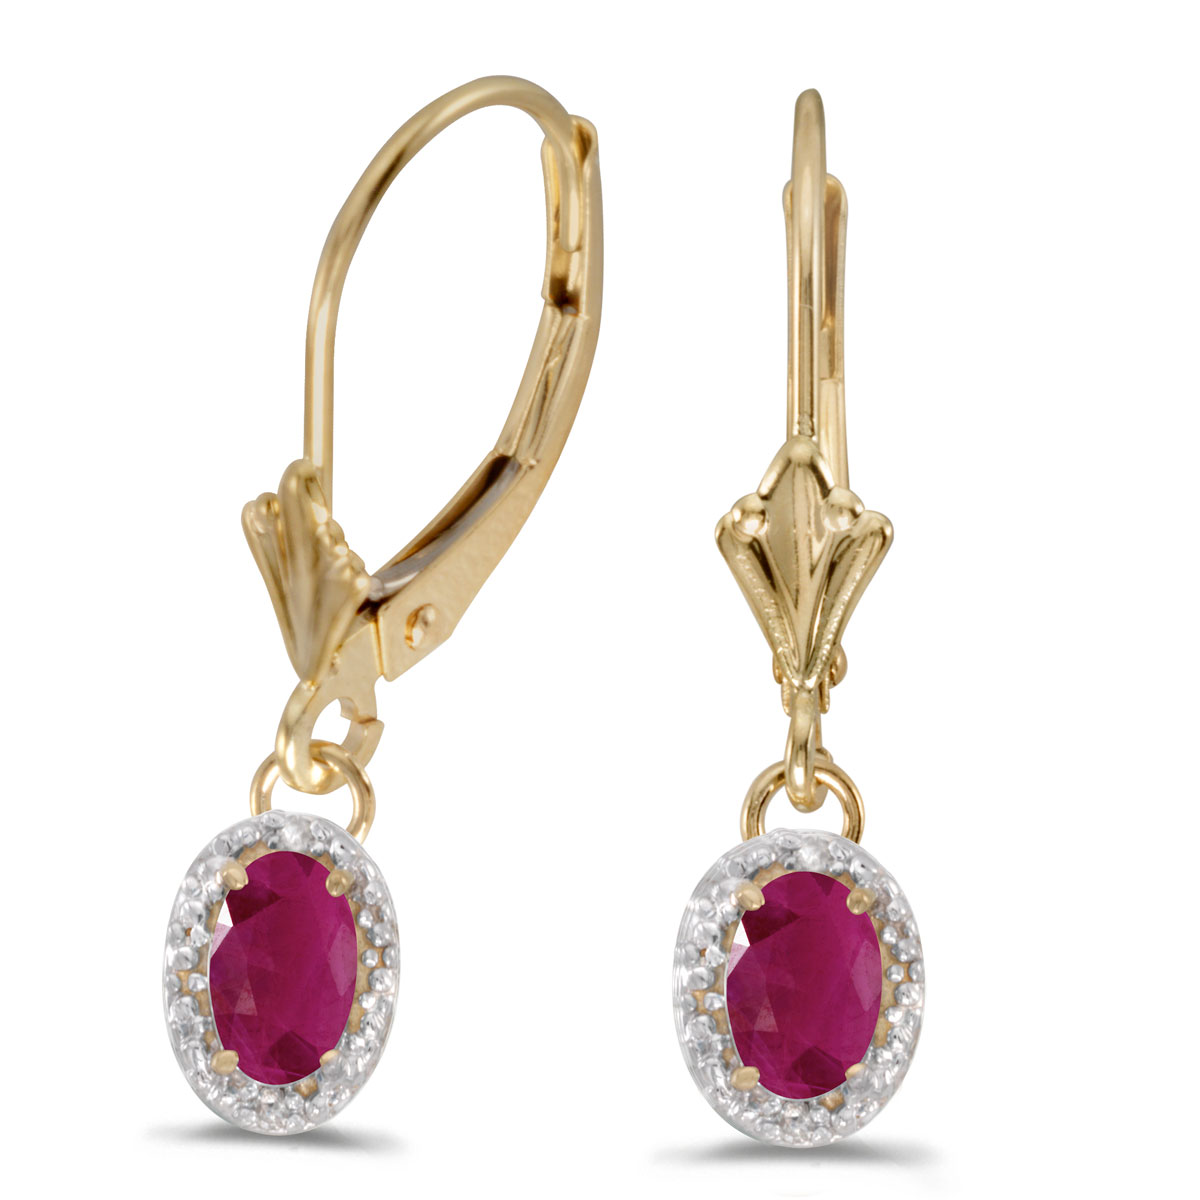 Beautiful 10k yellow gold leverback earrings with ravishing 6x4 mm rubies complemented with brigh...